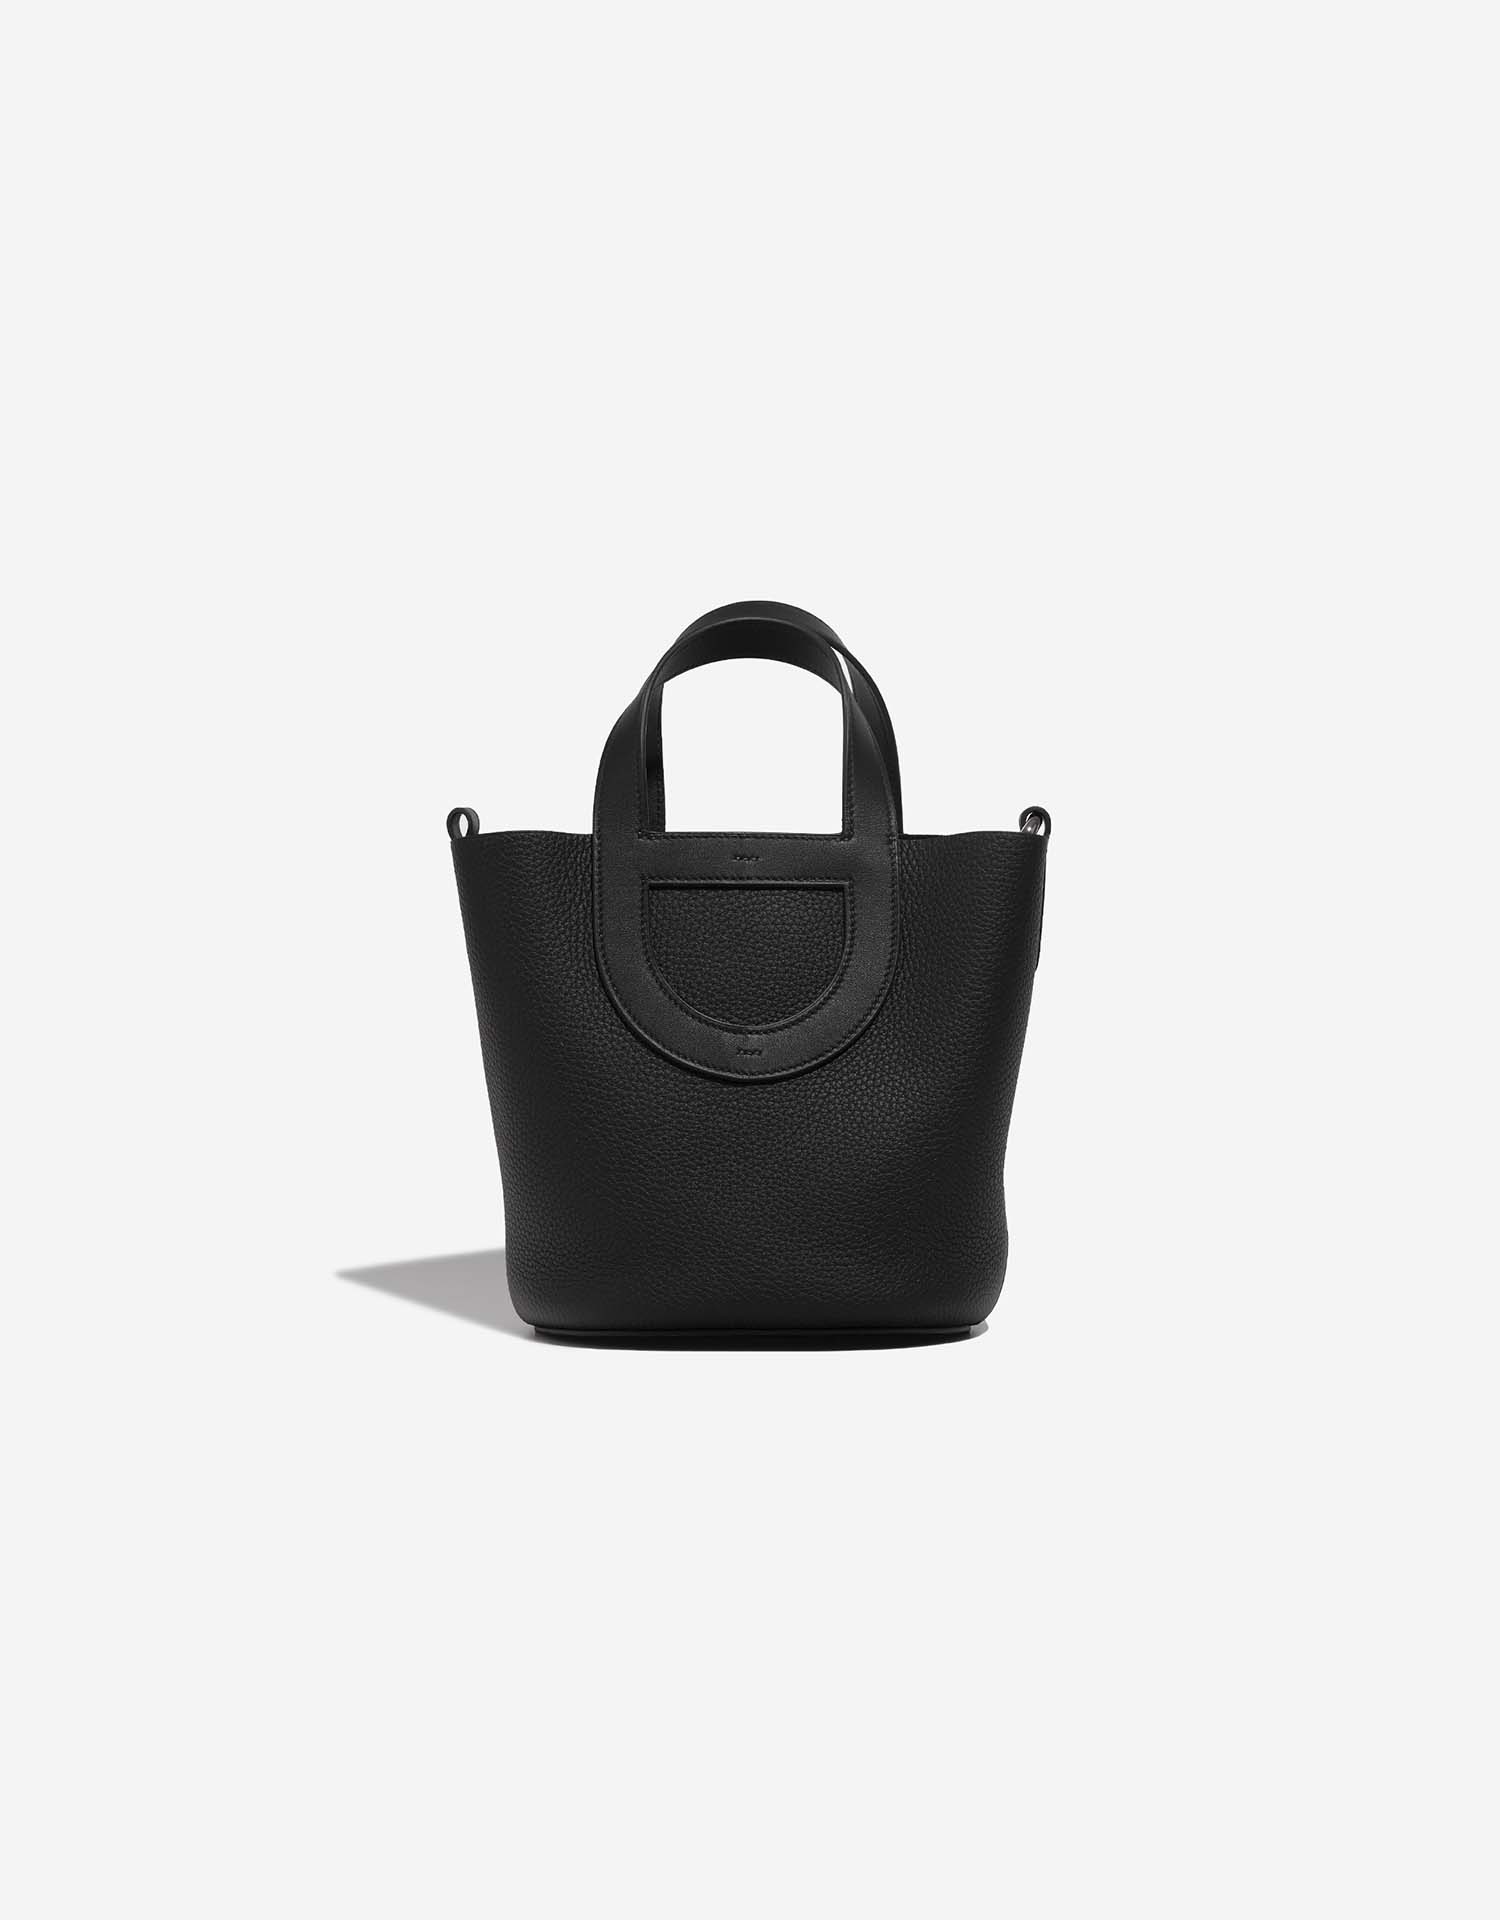 HERMES in-the-loop Tote Bag Size PM Taurillon Clemence/Swift Leather Black